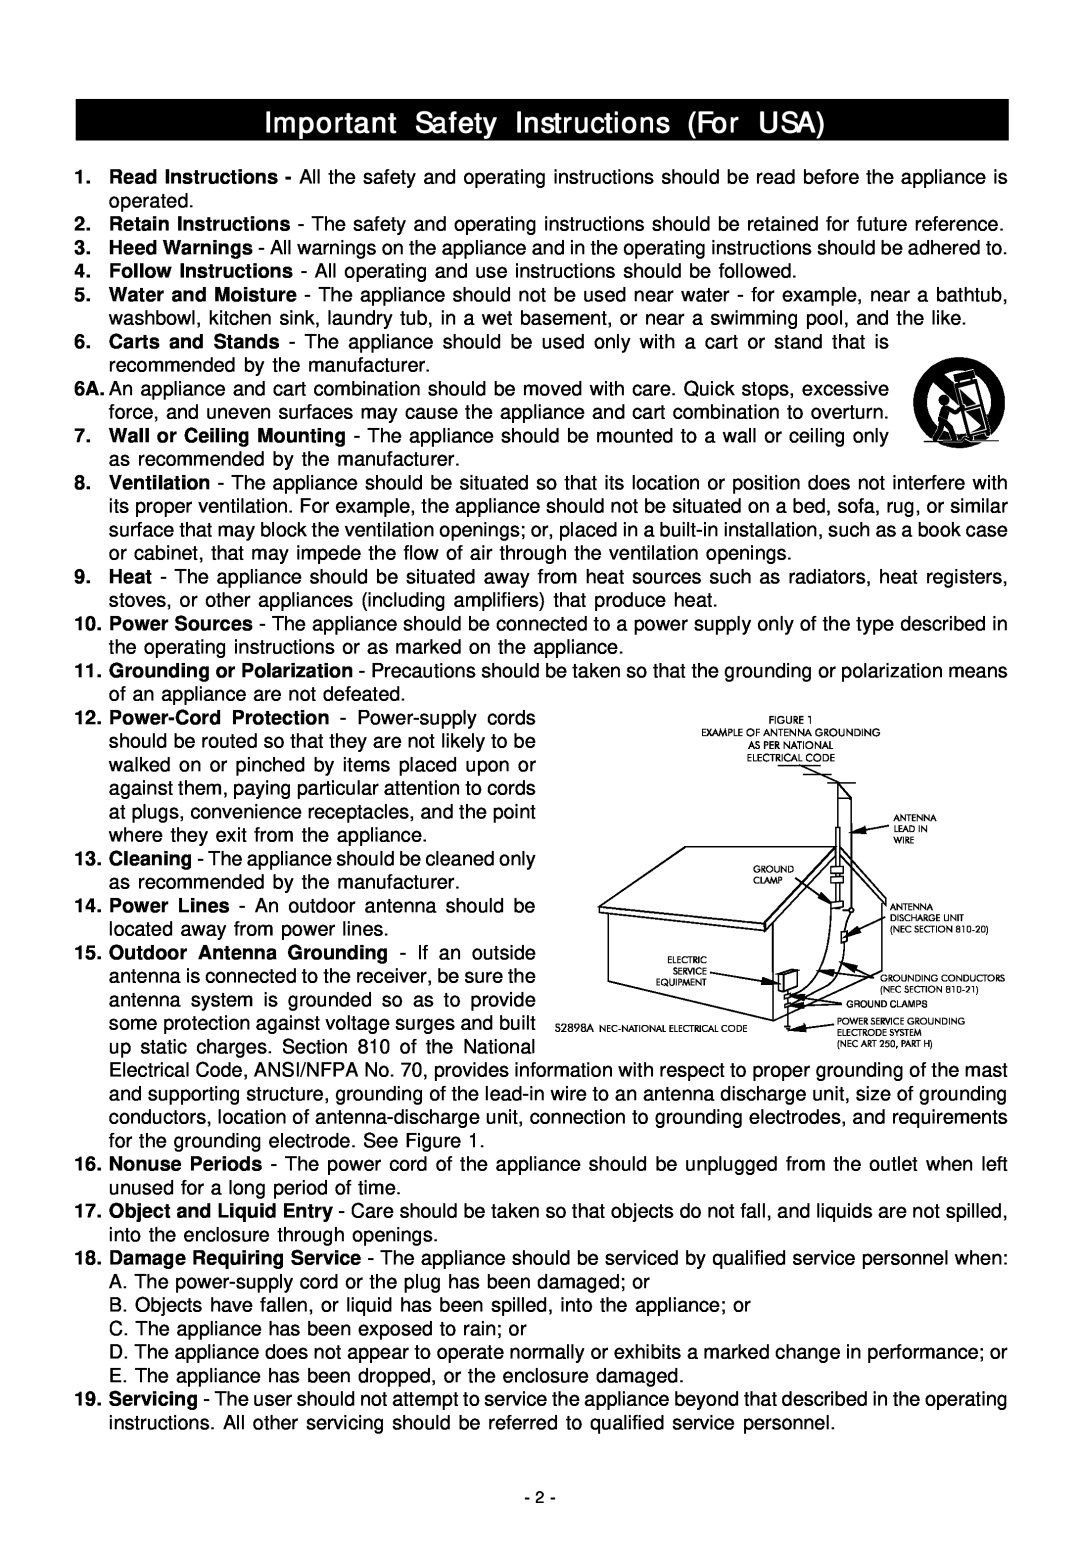 HiFi Works 811-TK5M91-031 Important Safety Instructions For USA, Outdoor Antenna Grounding - If an outside 